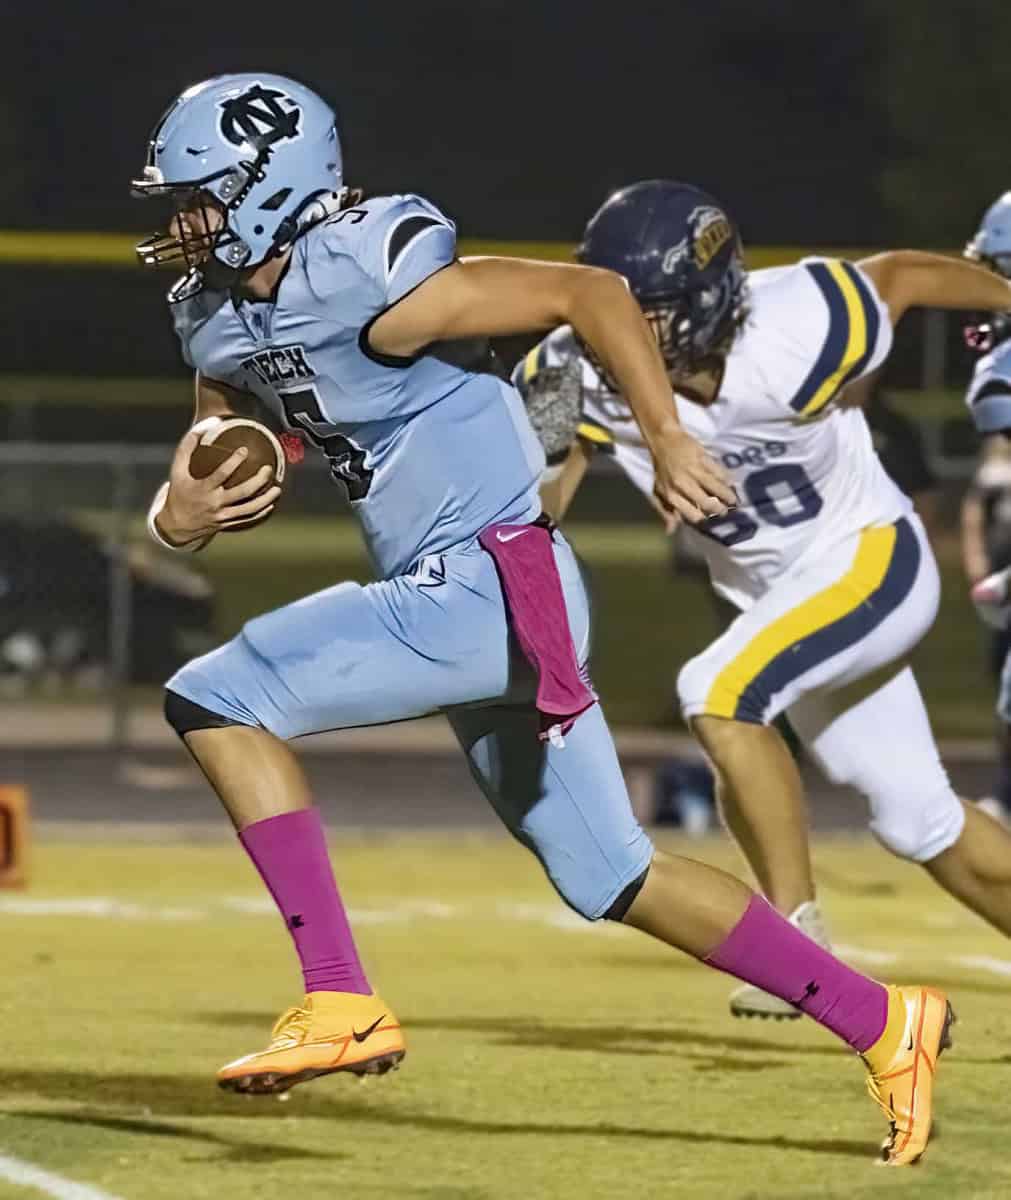 Nature Coast ,5, Jackson Hoyt finds room to run against Land O’ Lakes early in Friday night’s contest. Photo by JOE DiCRISTOFALO